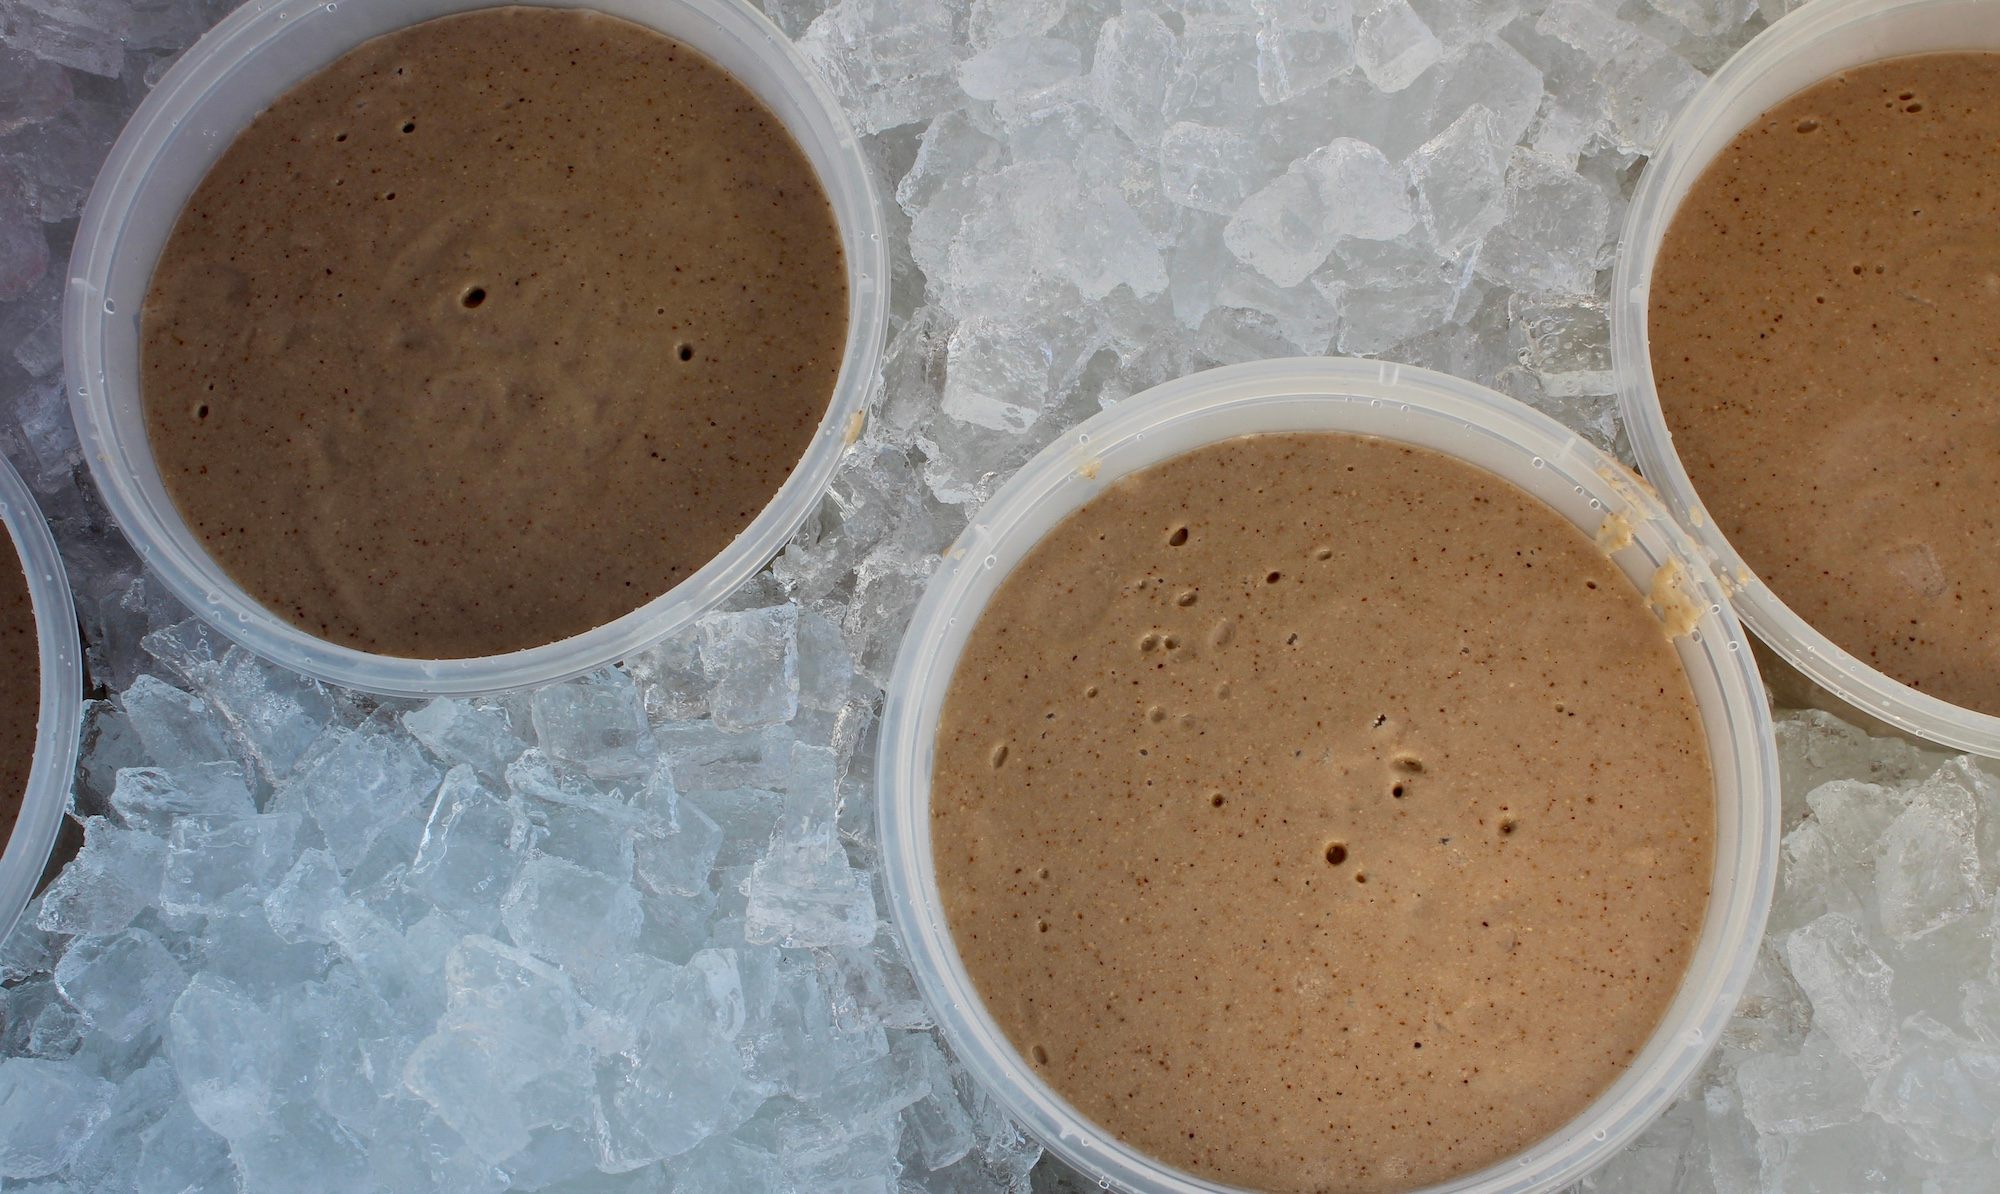 Sample often sells his products at local cultural events, such as this chilled acorn mush.